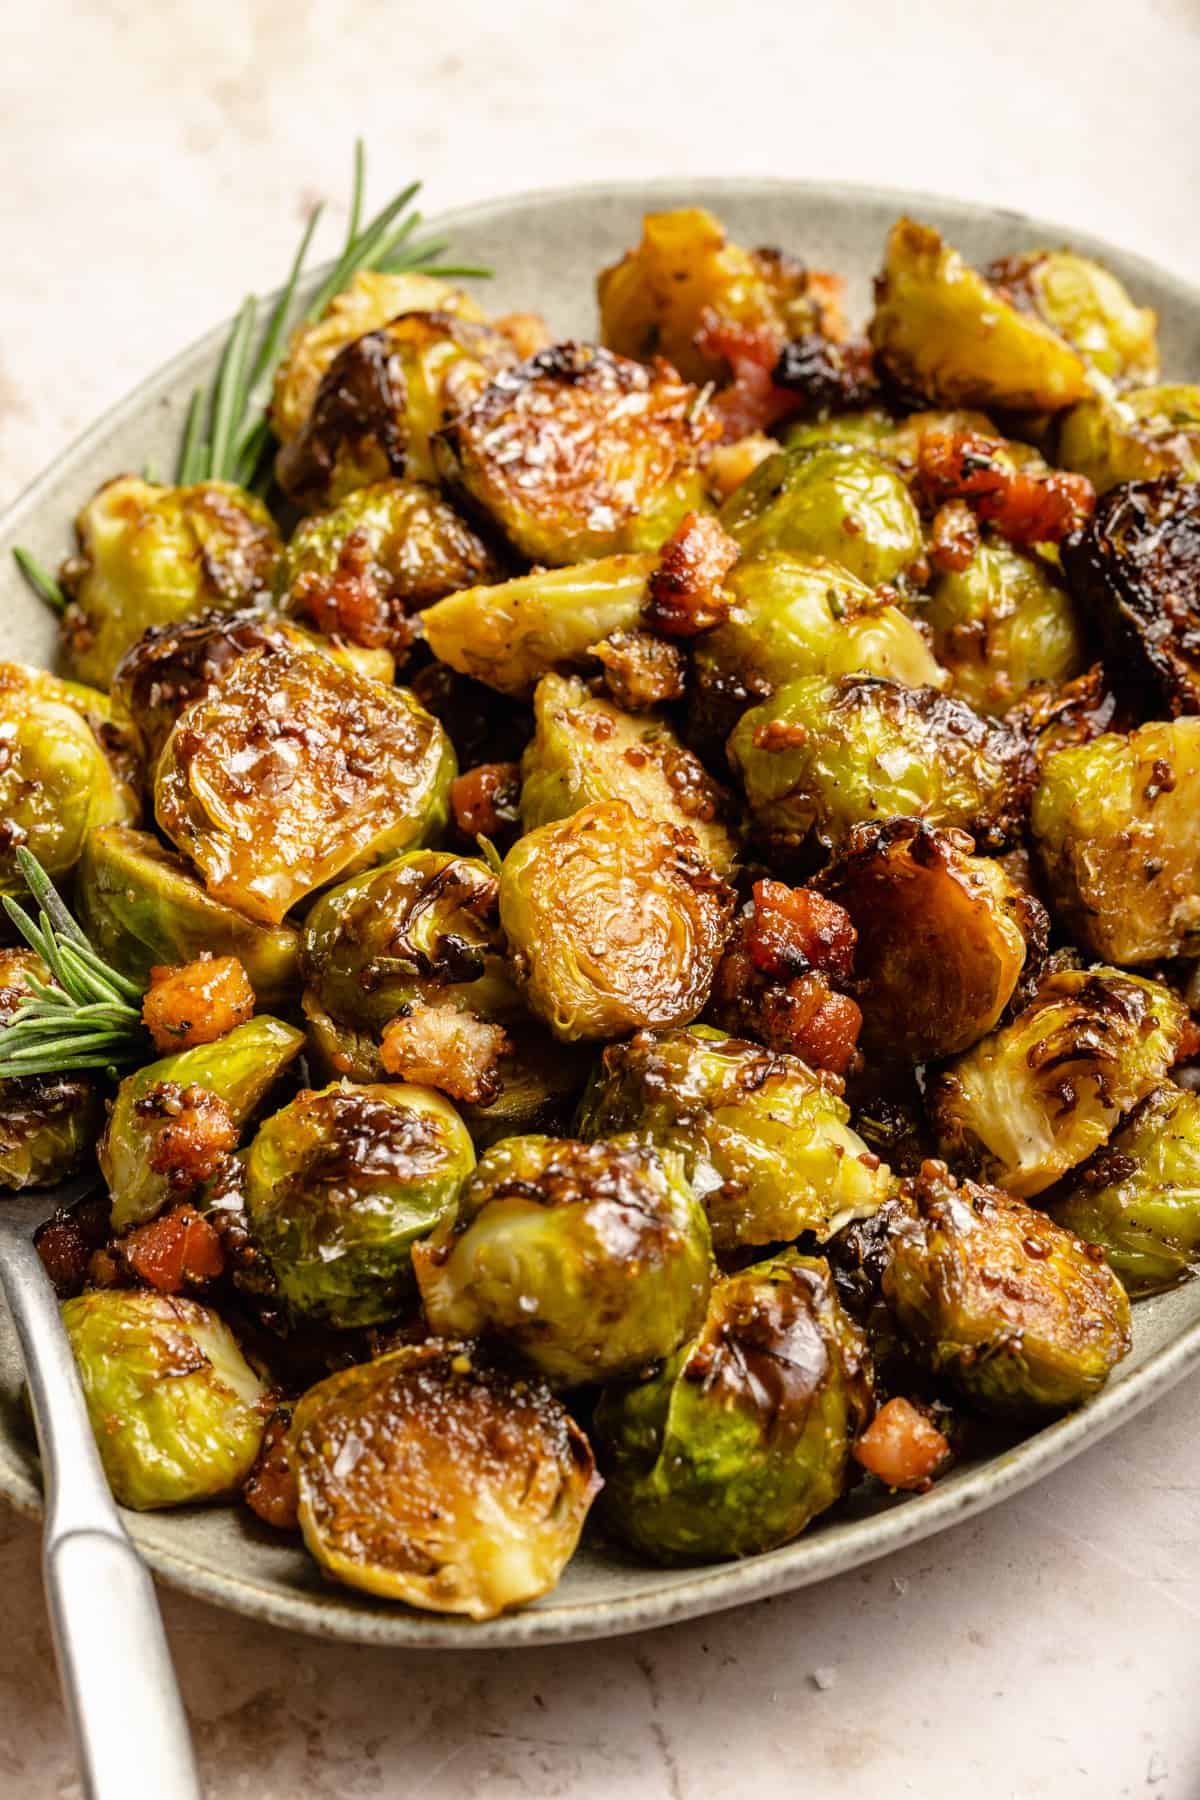 Caramelized brussels sprouts with bacon and maple on a plate with a spoon.